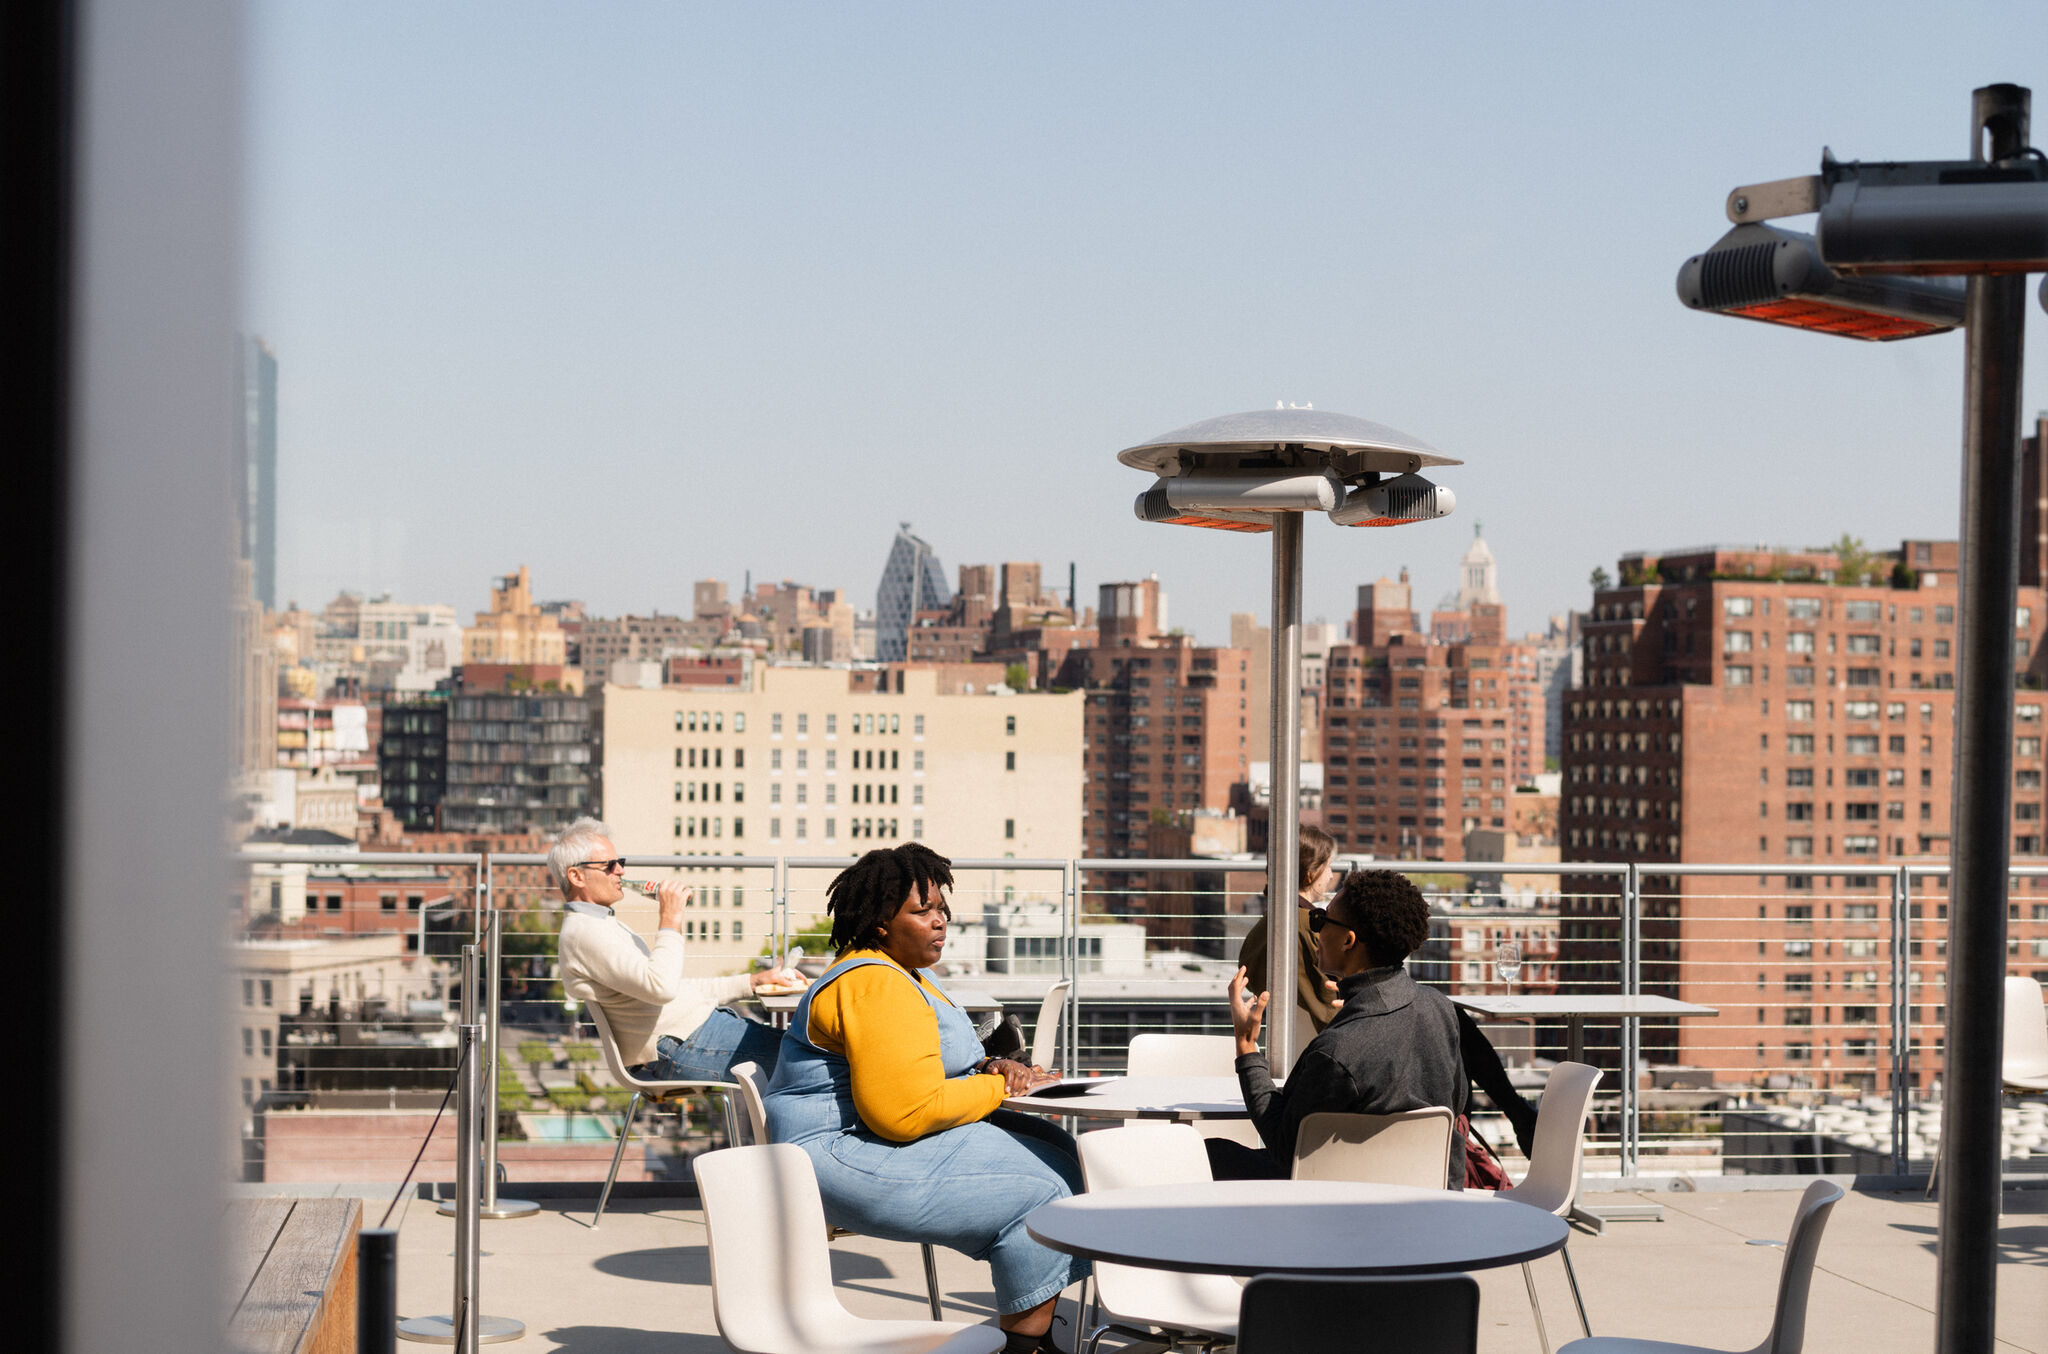 A view of two people dining on the terrace and a city view on a sunny day.